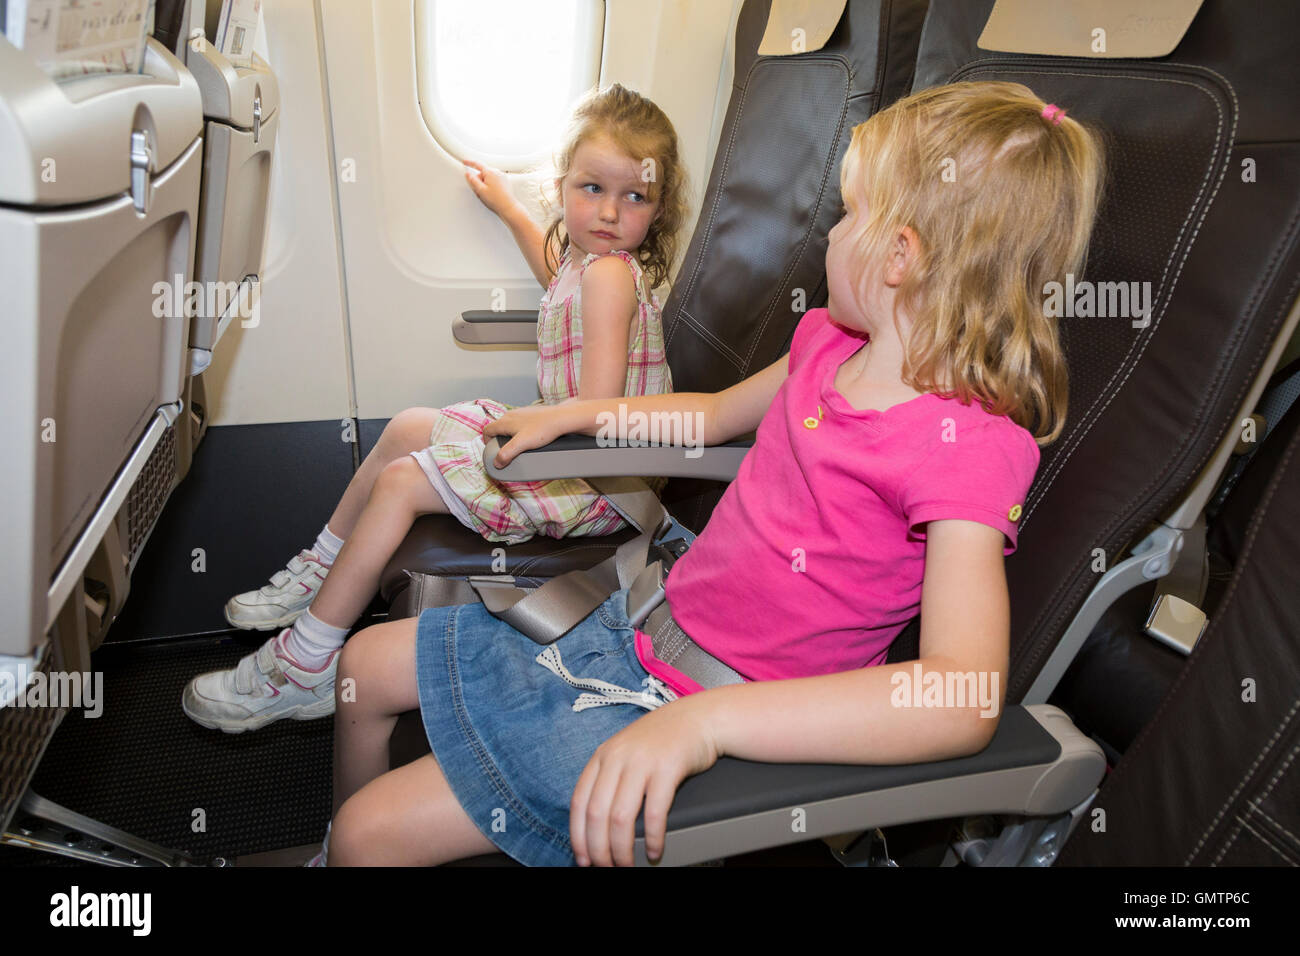 Child / children / two sisters aged 6 and 4 going on holiday / vacation / flying on an air plane / airplane / aeroplane flight Stock Photo